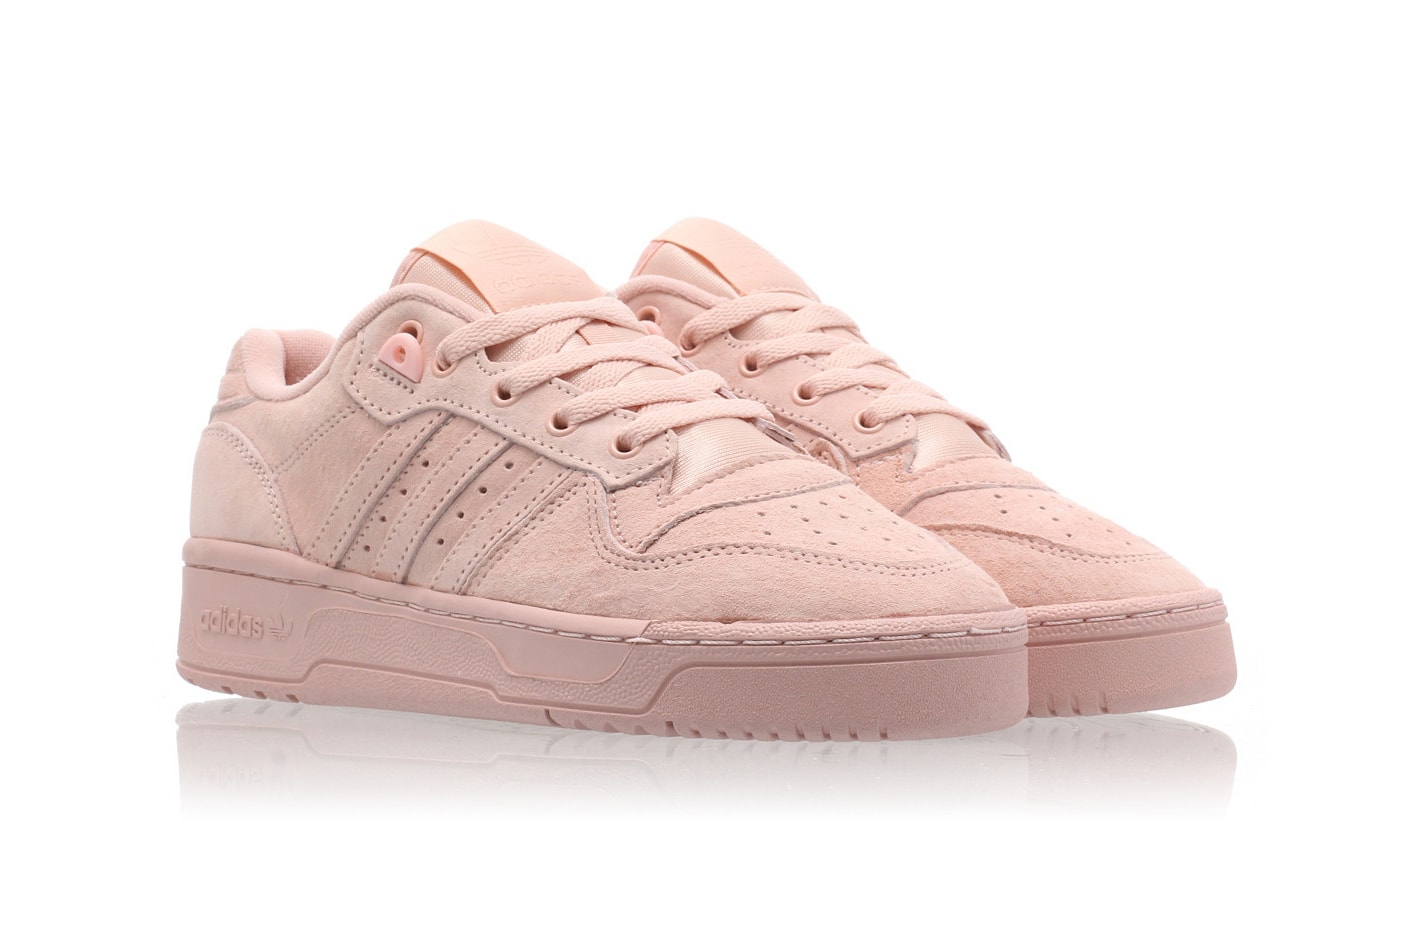 adidas Originals Rivalry Low Coral Vapour Pink Sneakers Trainers Women's 